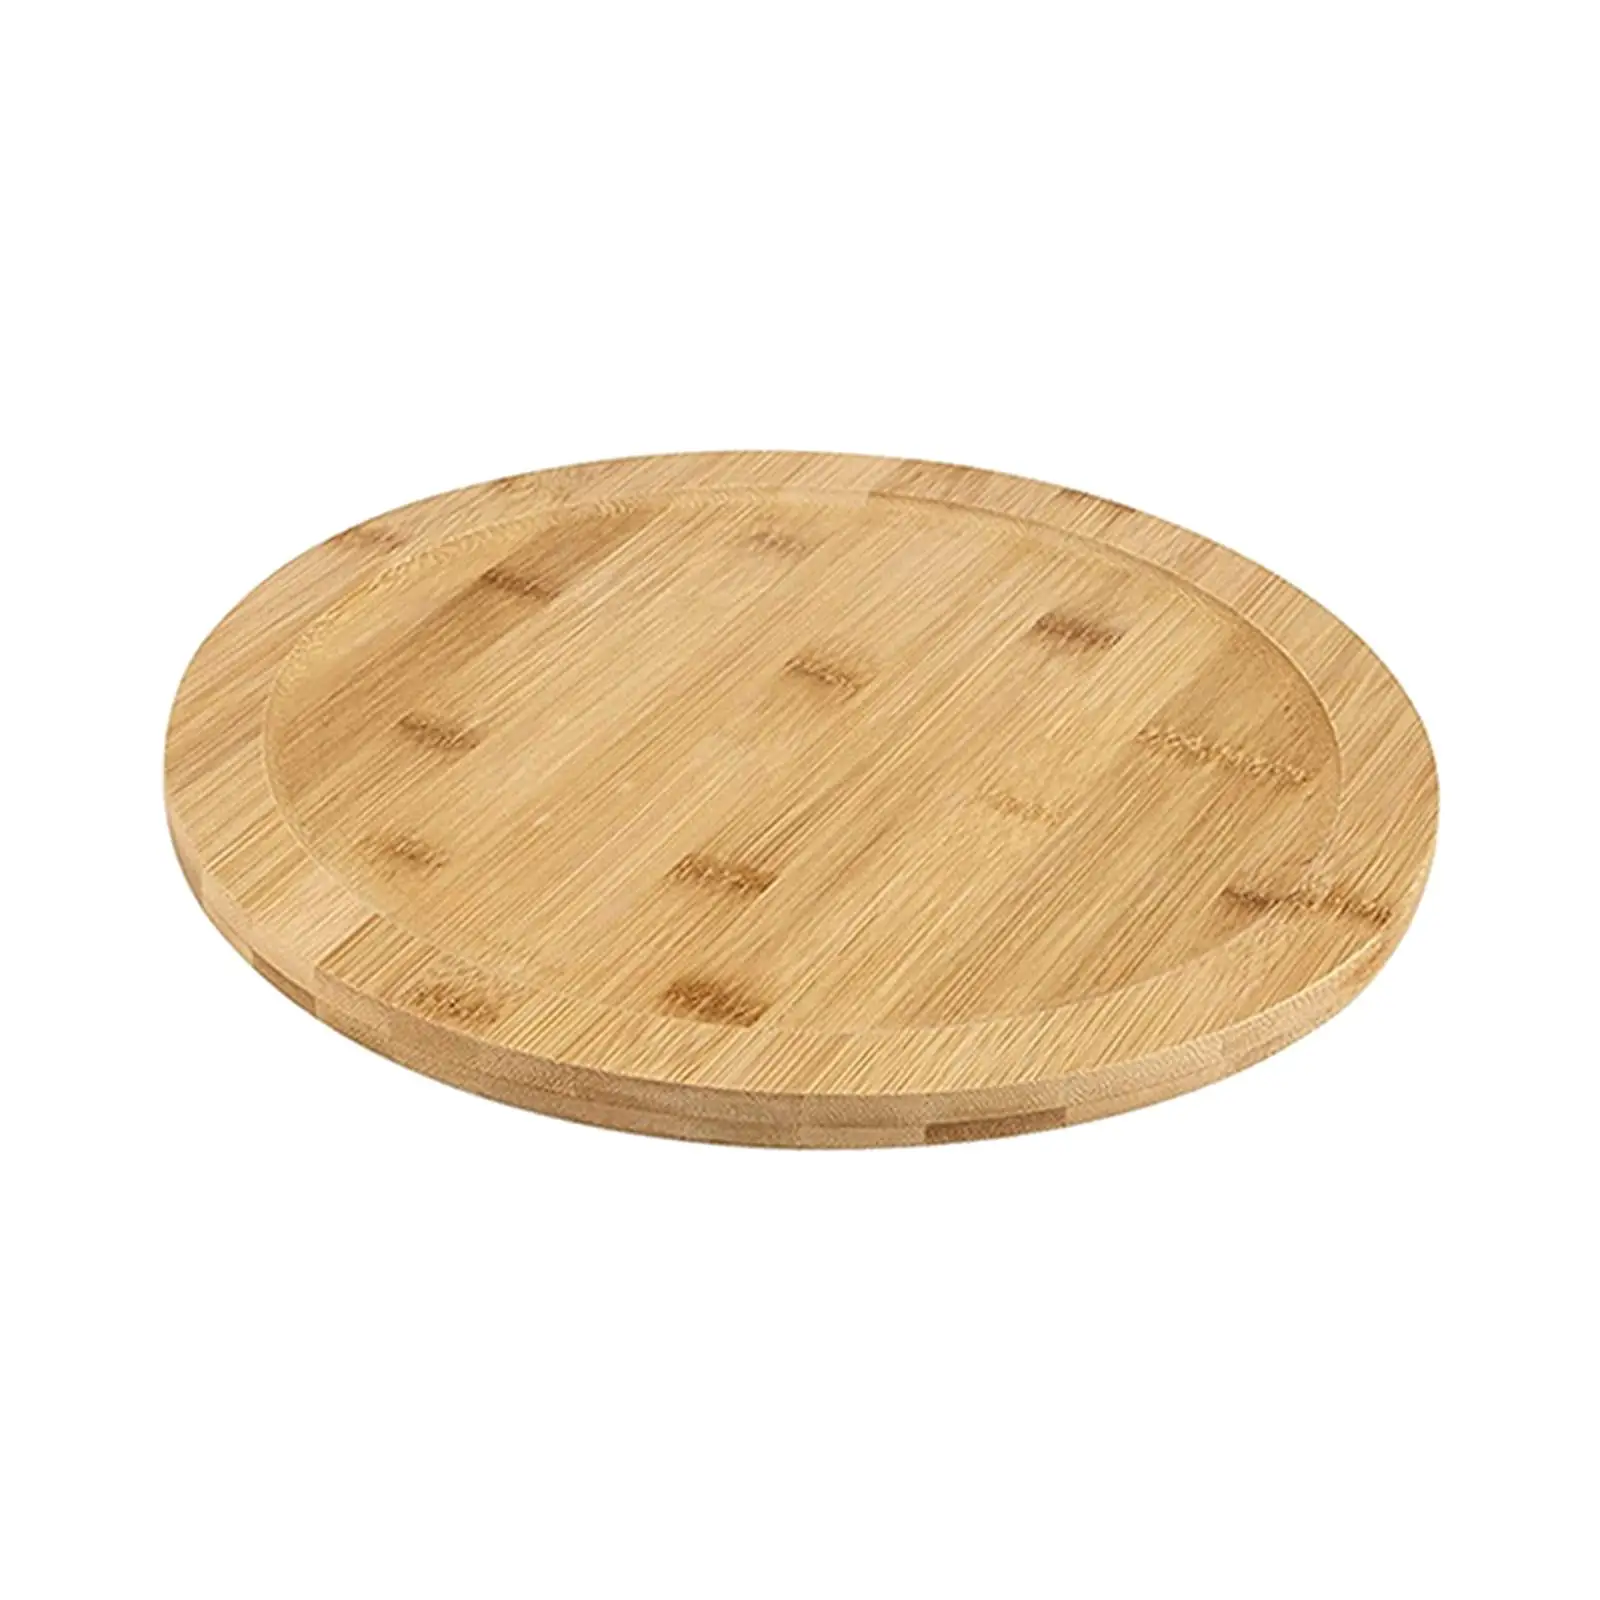 Wooden Turntable Multipurpose Serving Plate for Cabinet Dining Table Kitchen